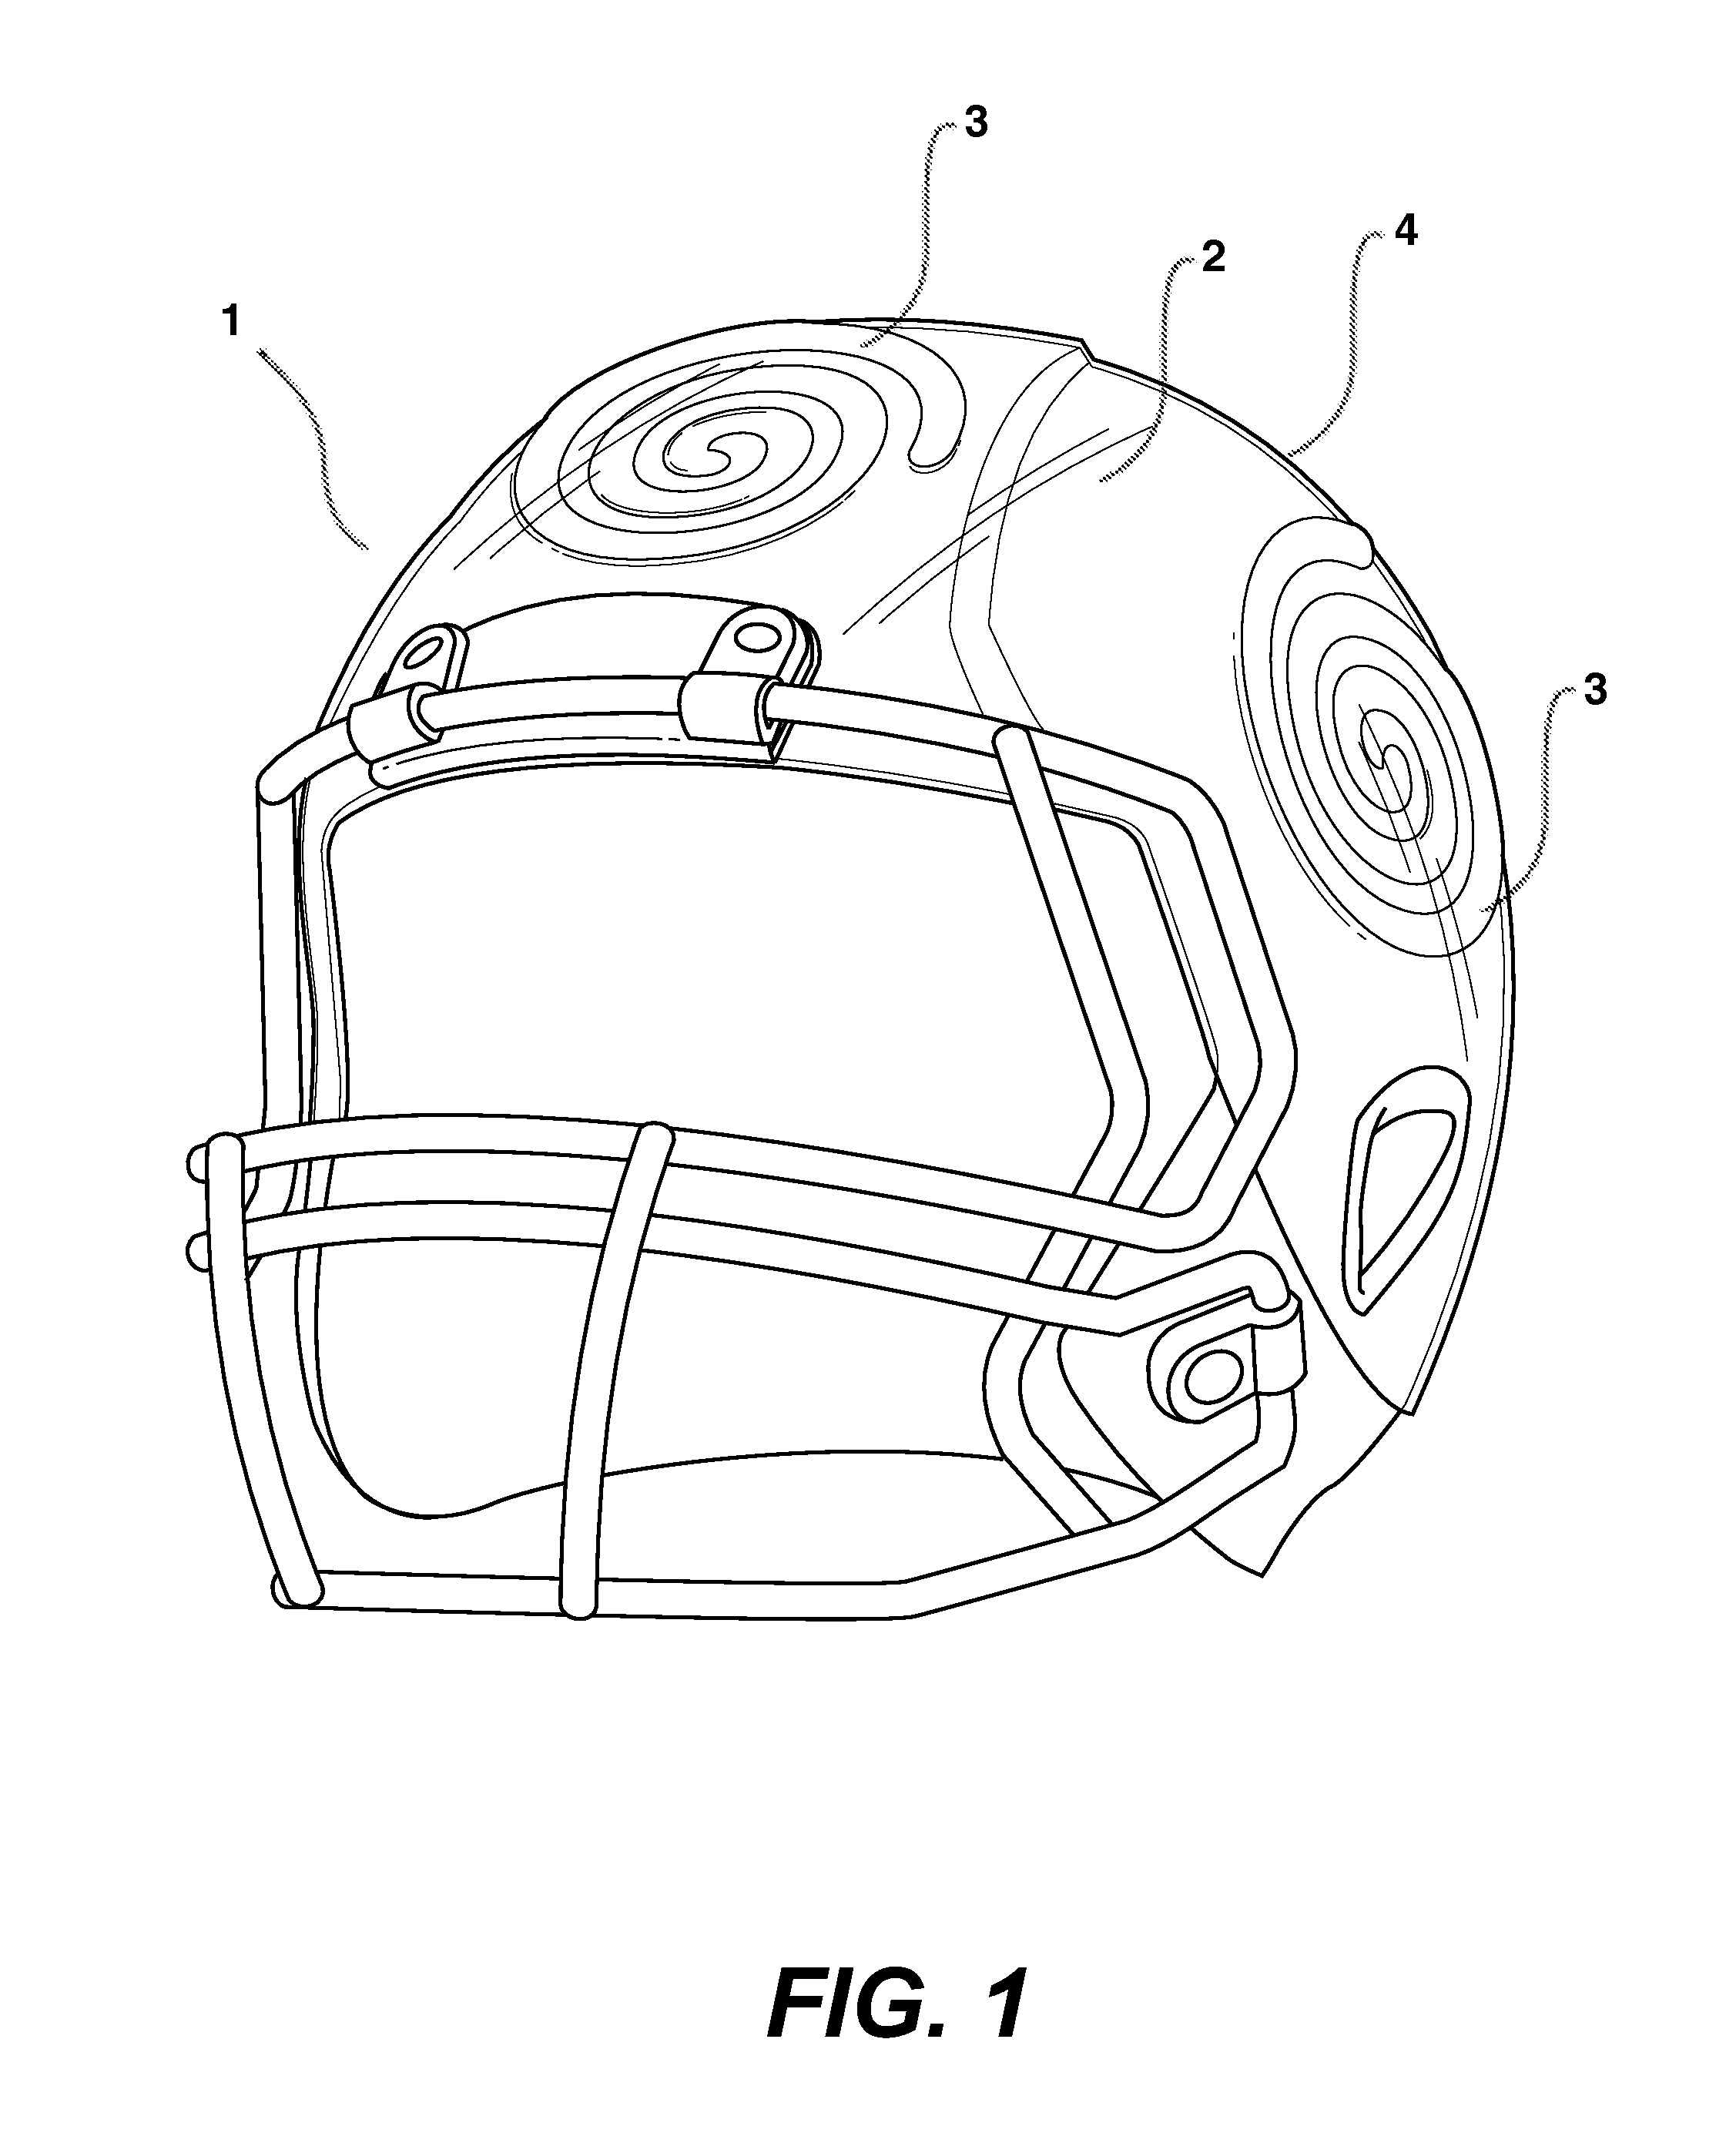 Helmet for Reducing Concussive Forces During Collision